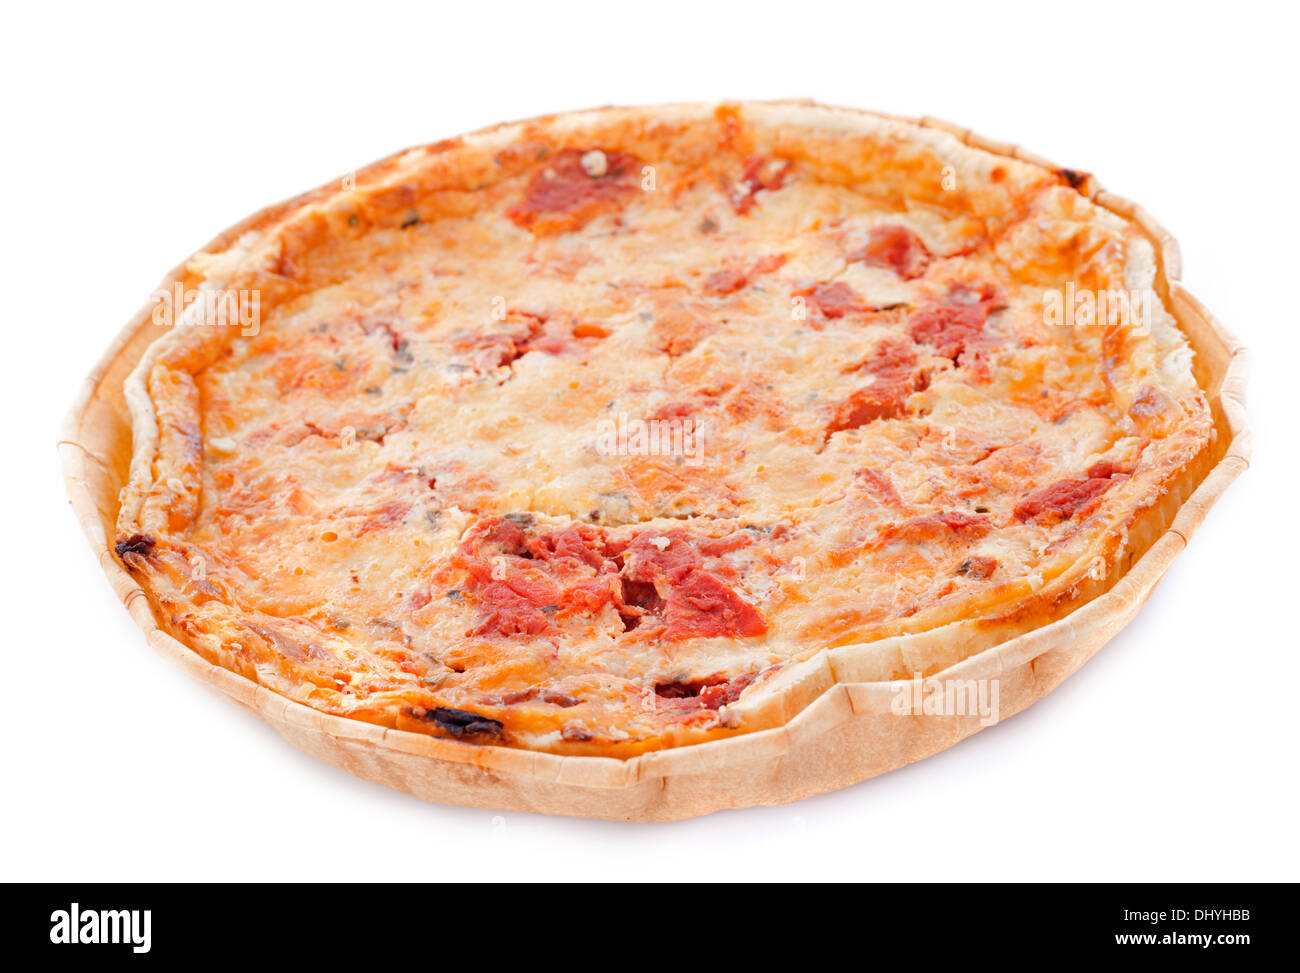 tomatoes tart in front of white background Stock Photo